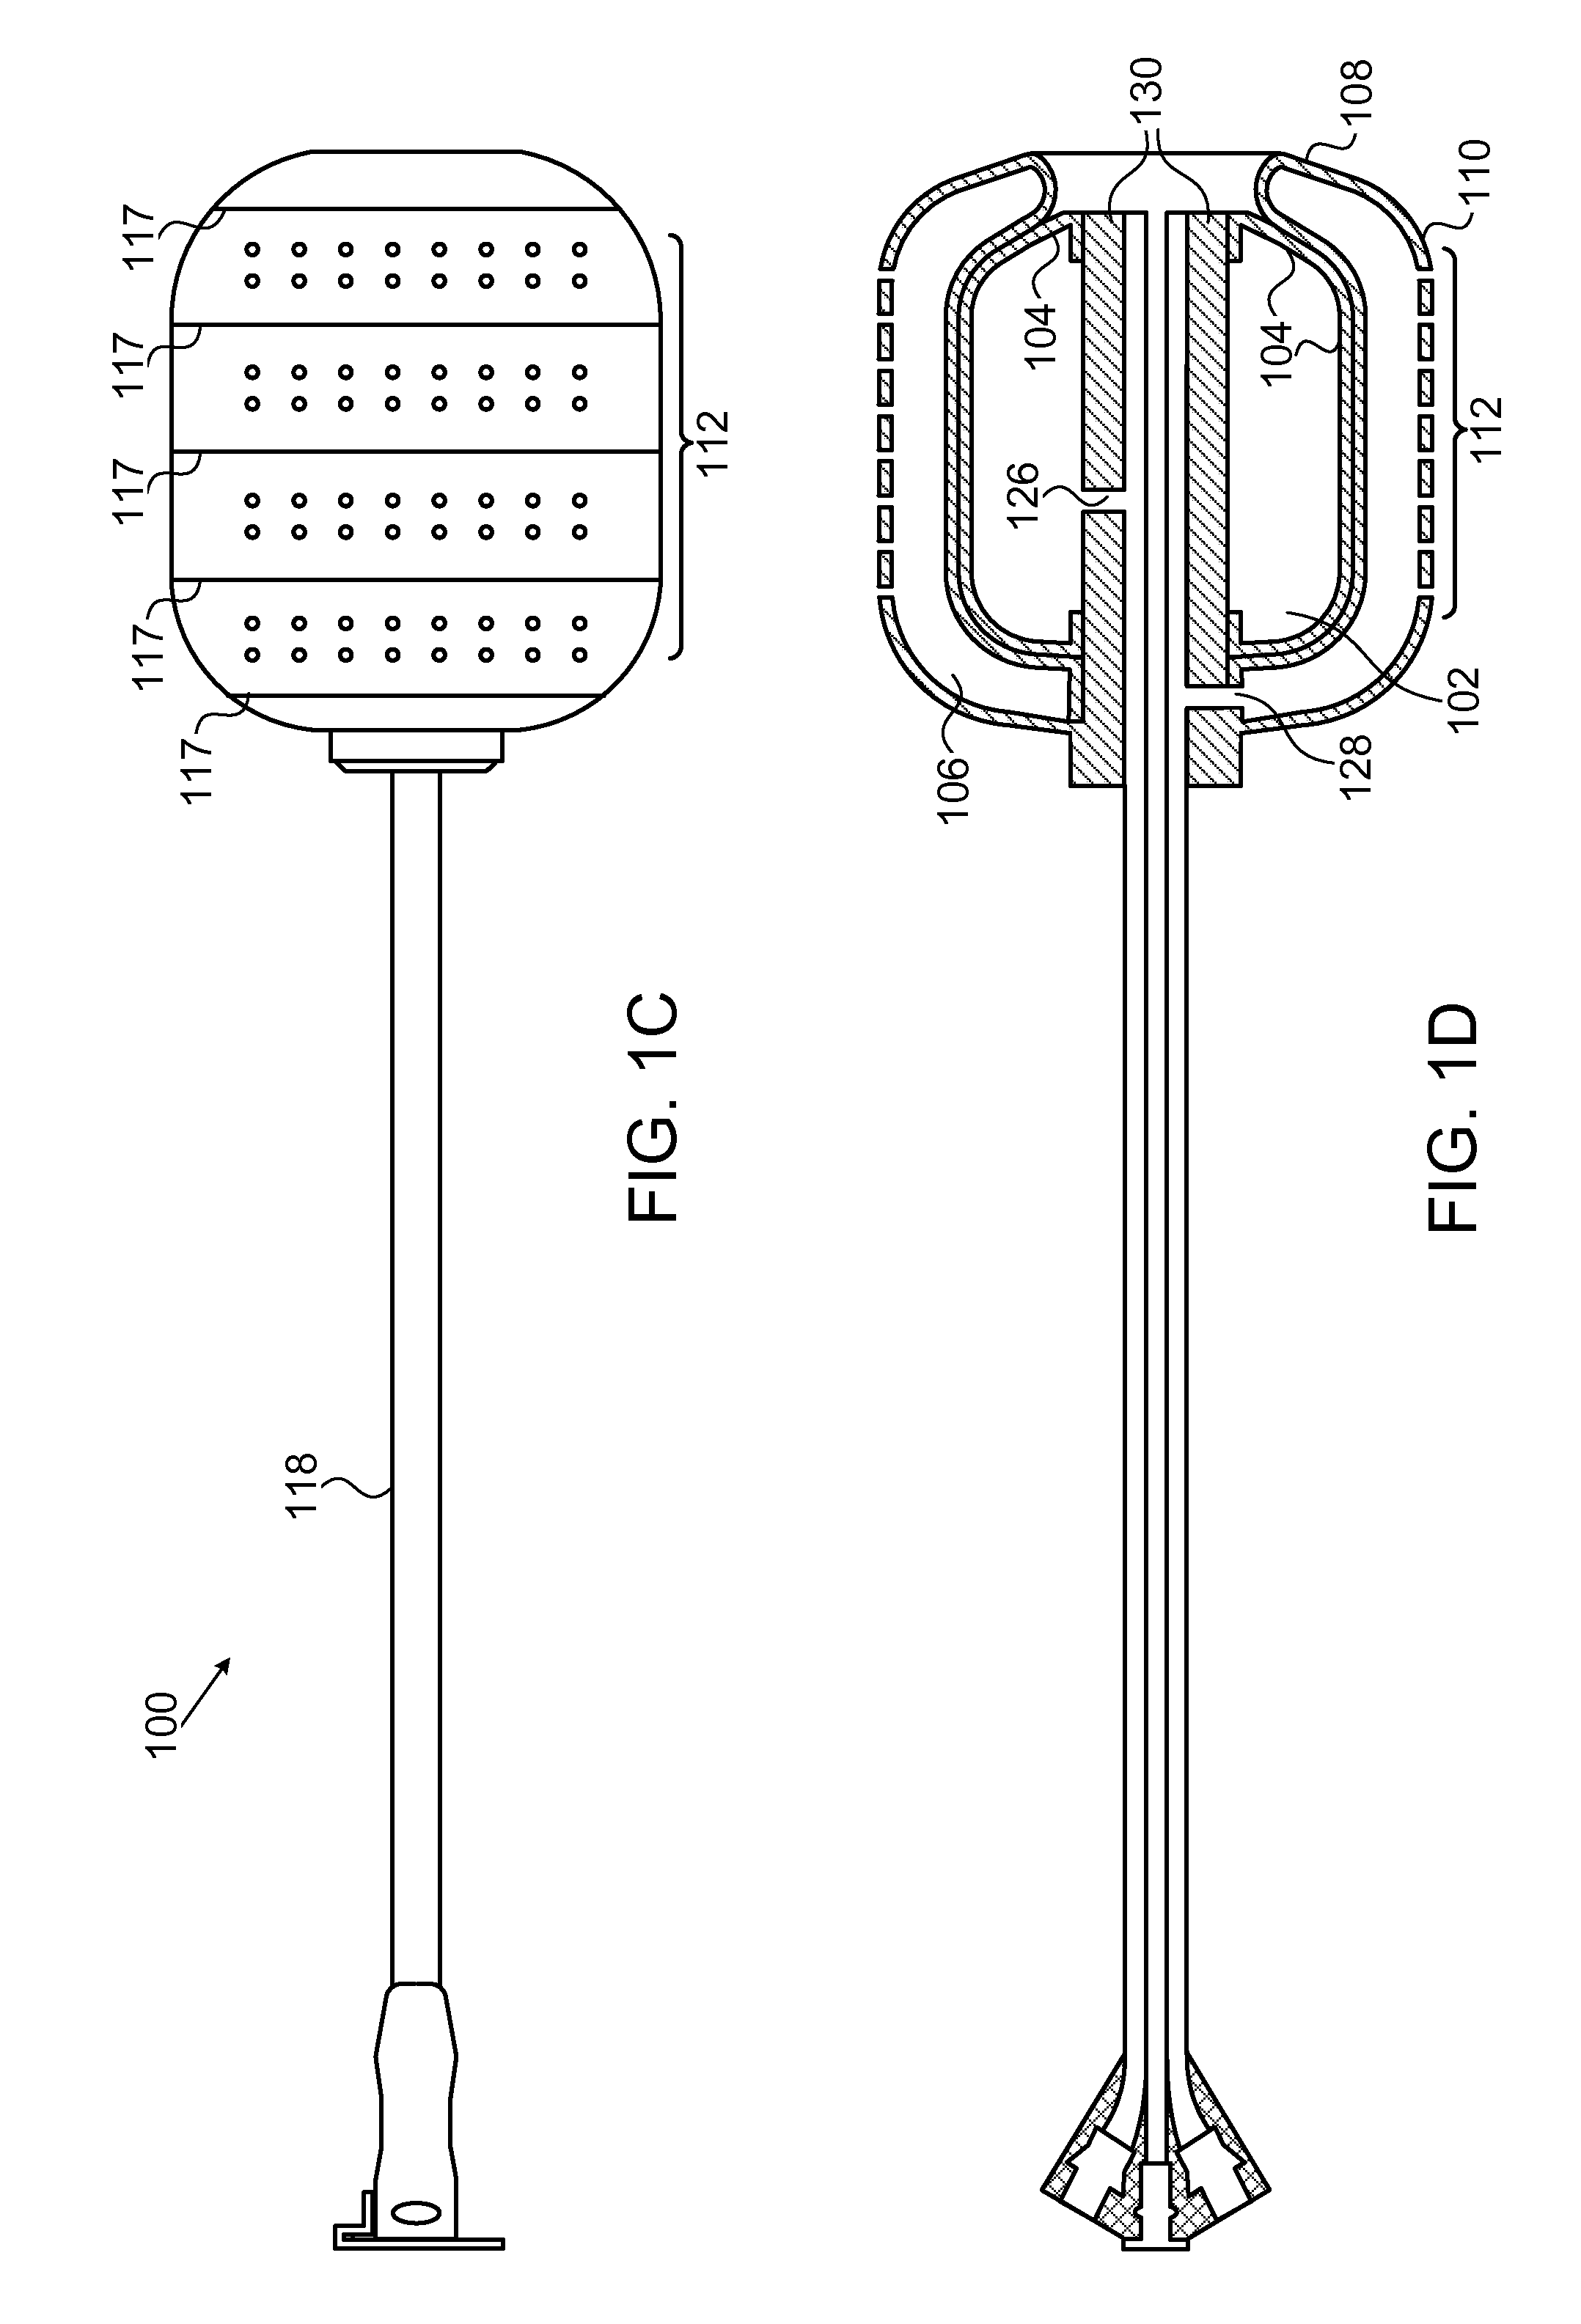 Stent devices for support, controlled drug delivery and pain management after vaginal surgery